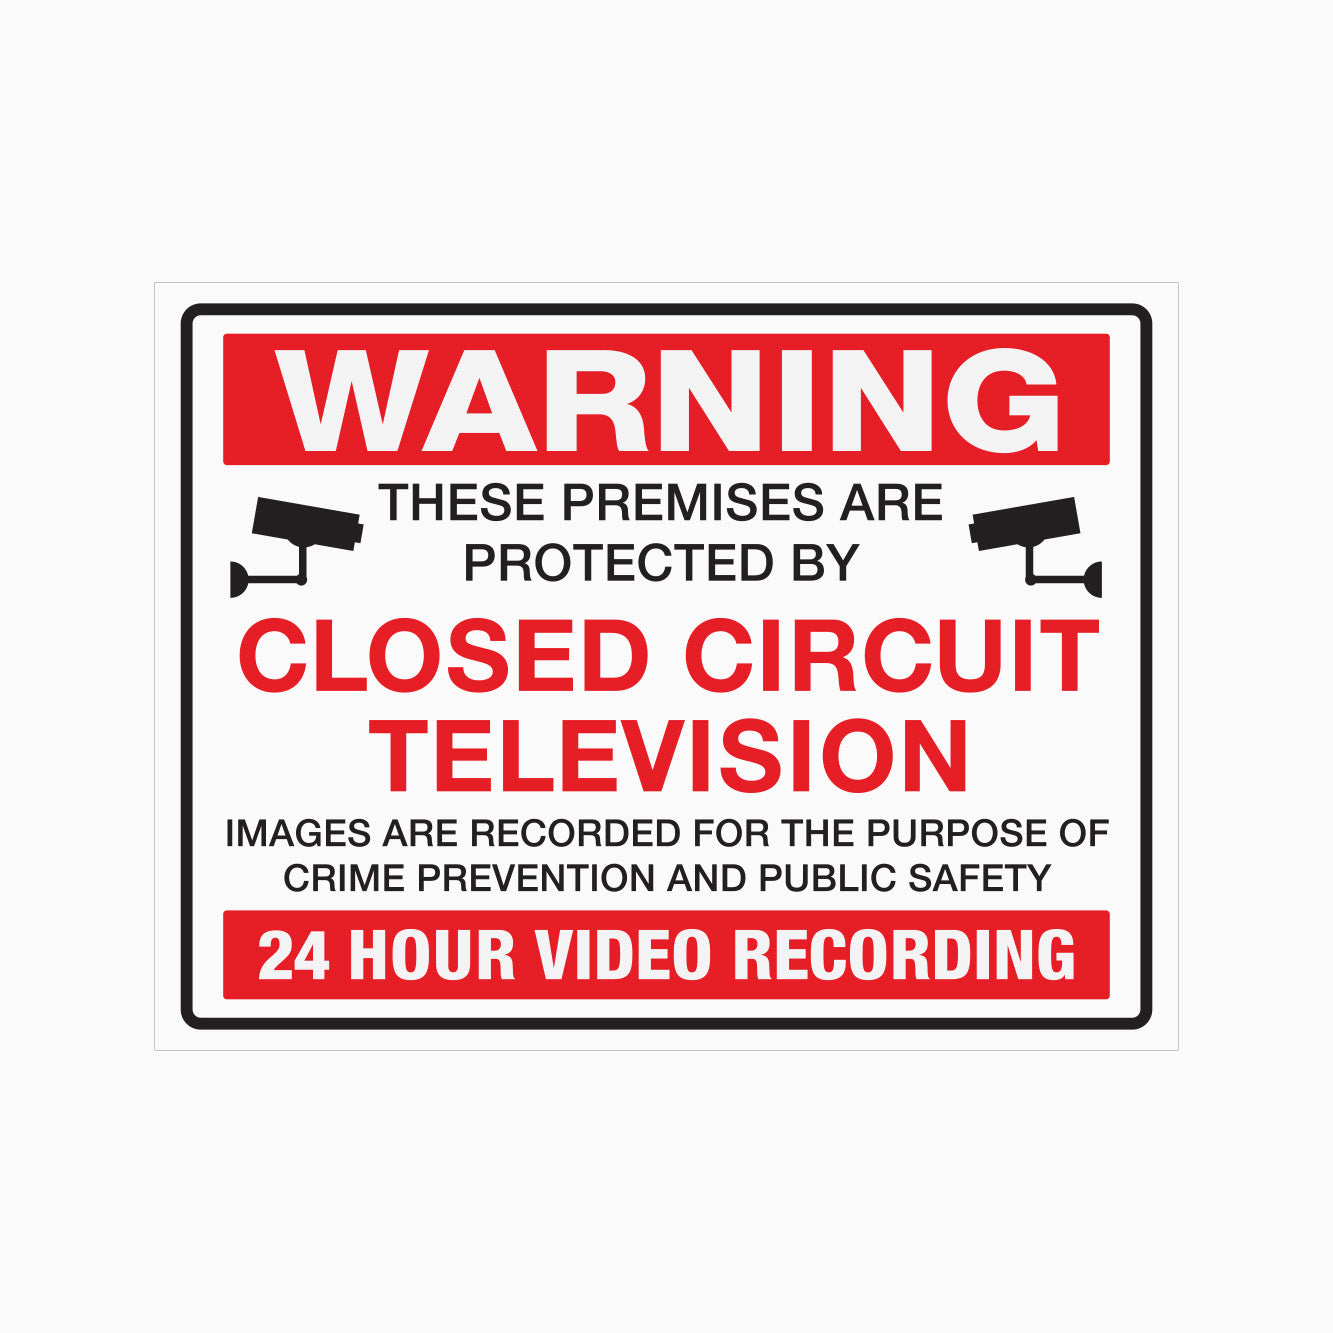 WARNING SIGN - THESE PREMISES ARE PROTECTED BY CLOSED CIRCUIT TELEVISION - IMAGES ARE RECORDED FOR THE PURPOSE OF CRIME PREVENTAION AND PUBLIC SAFETY - 24 HOUR VIDEO RECORDING SIGN